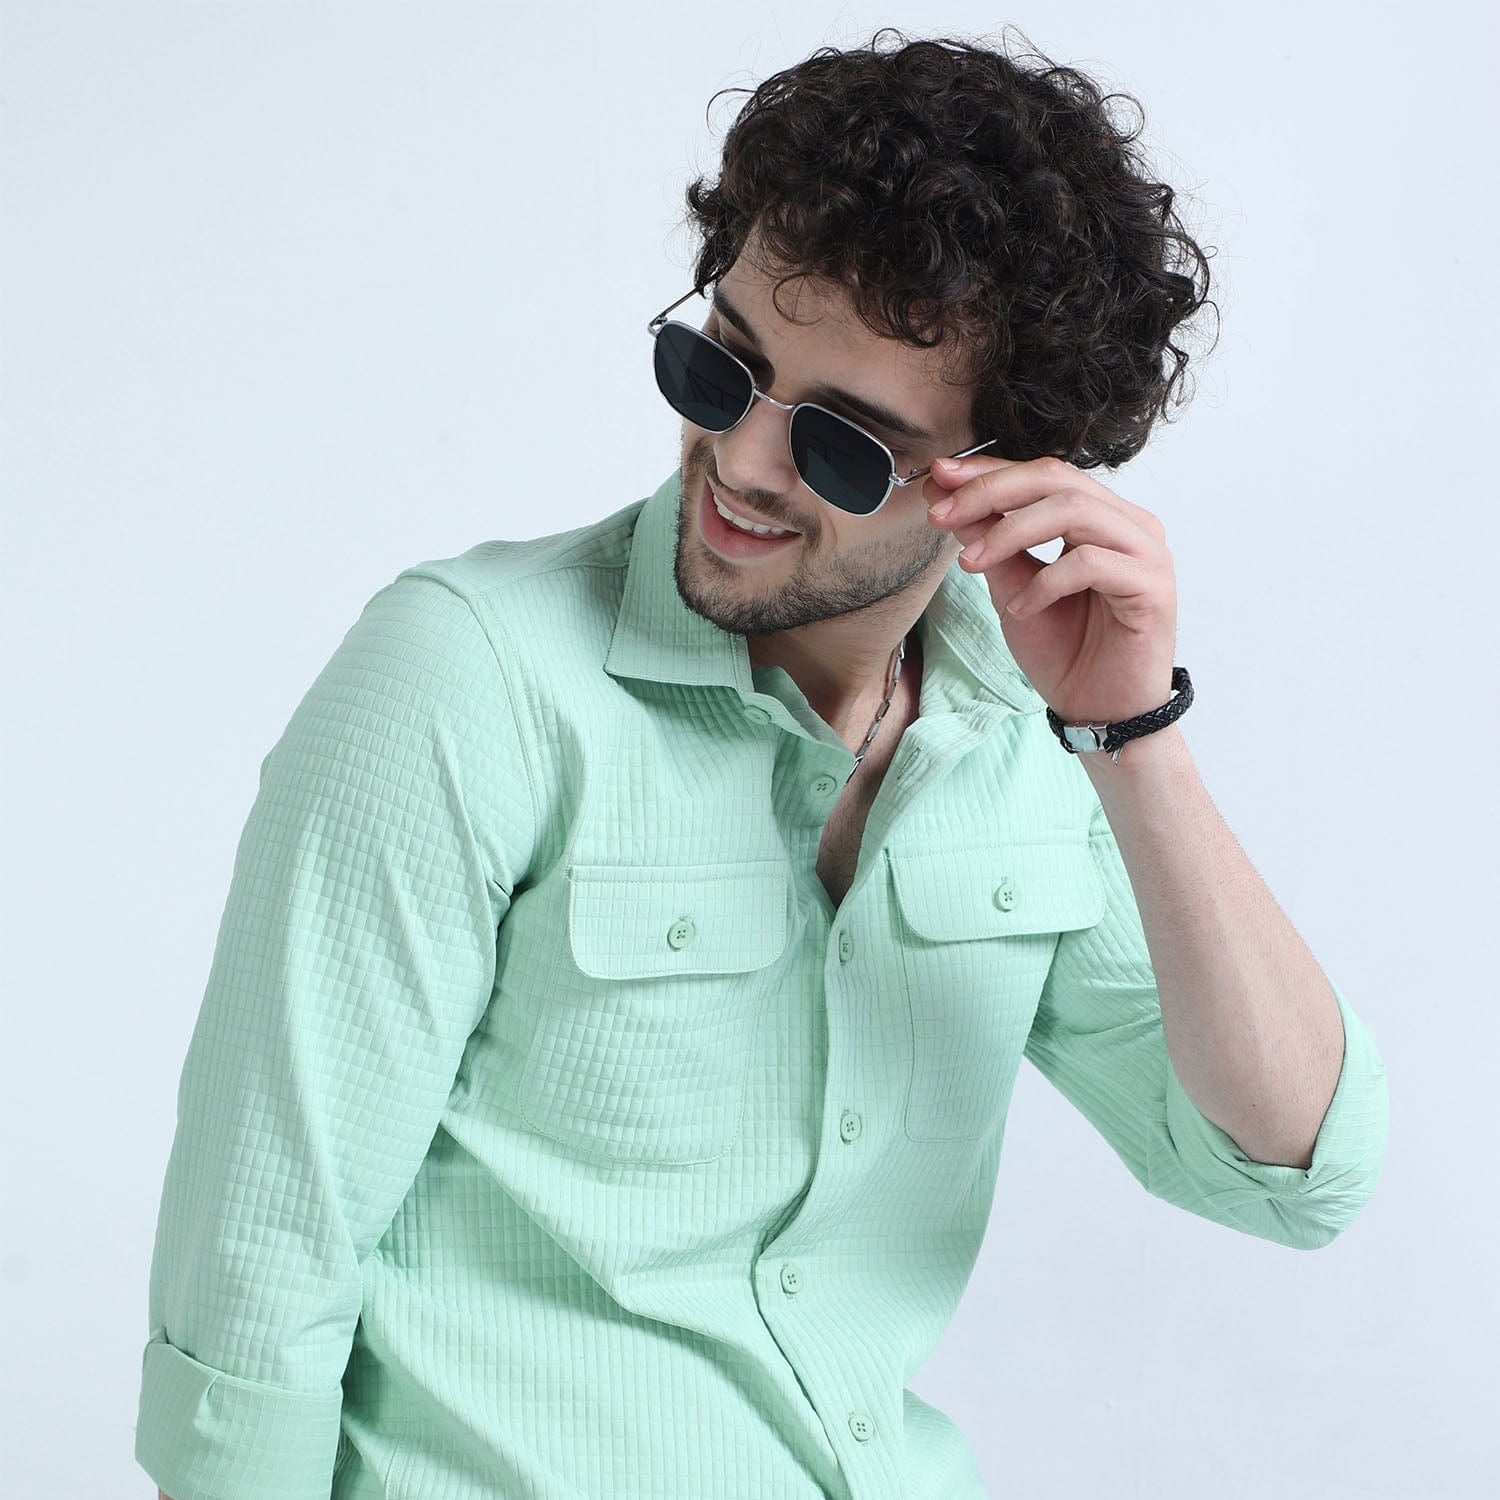 Buy Stylish Textured Solid Light Green Shirt Mens OnlineRs. 1349.00